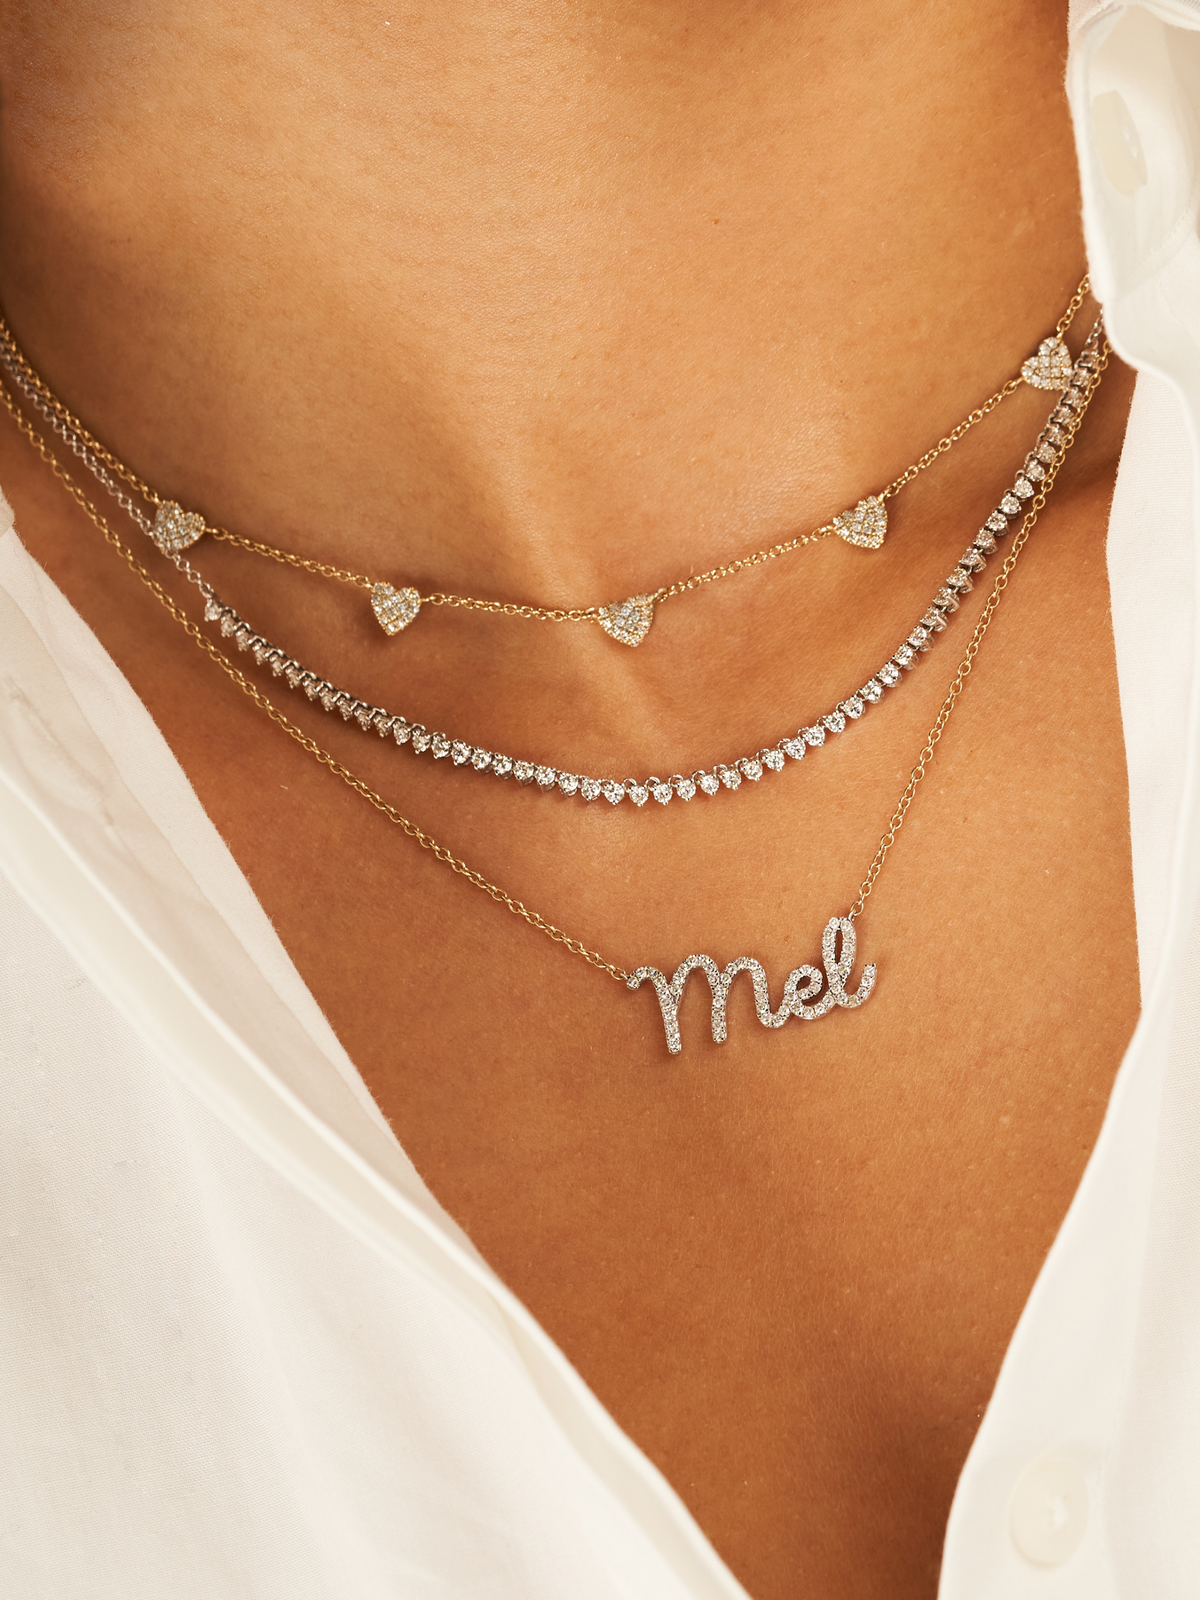 Diamond tennis chain necklace in 14K white gold layered with dainty diamond name necklace and diamond heart layering necklace